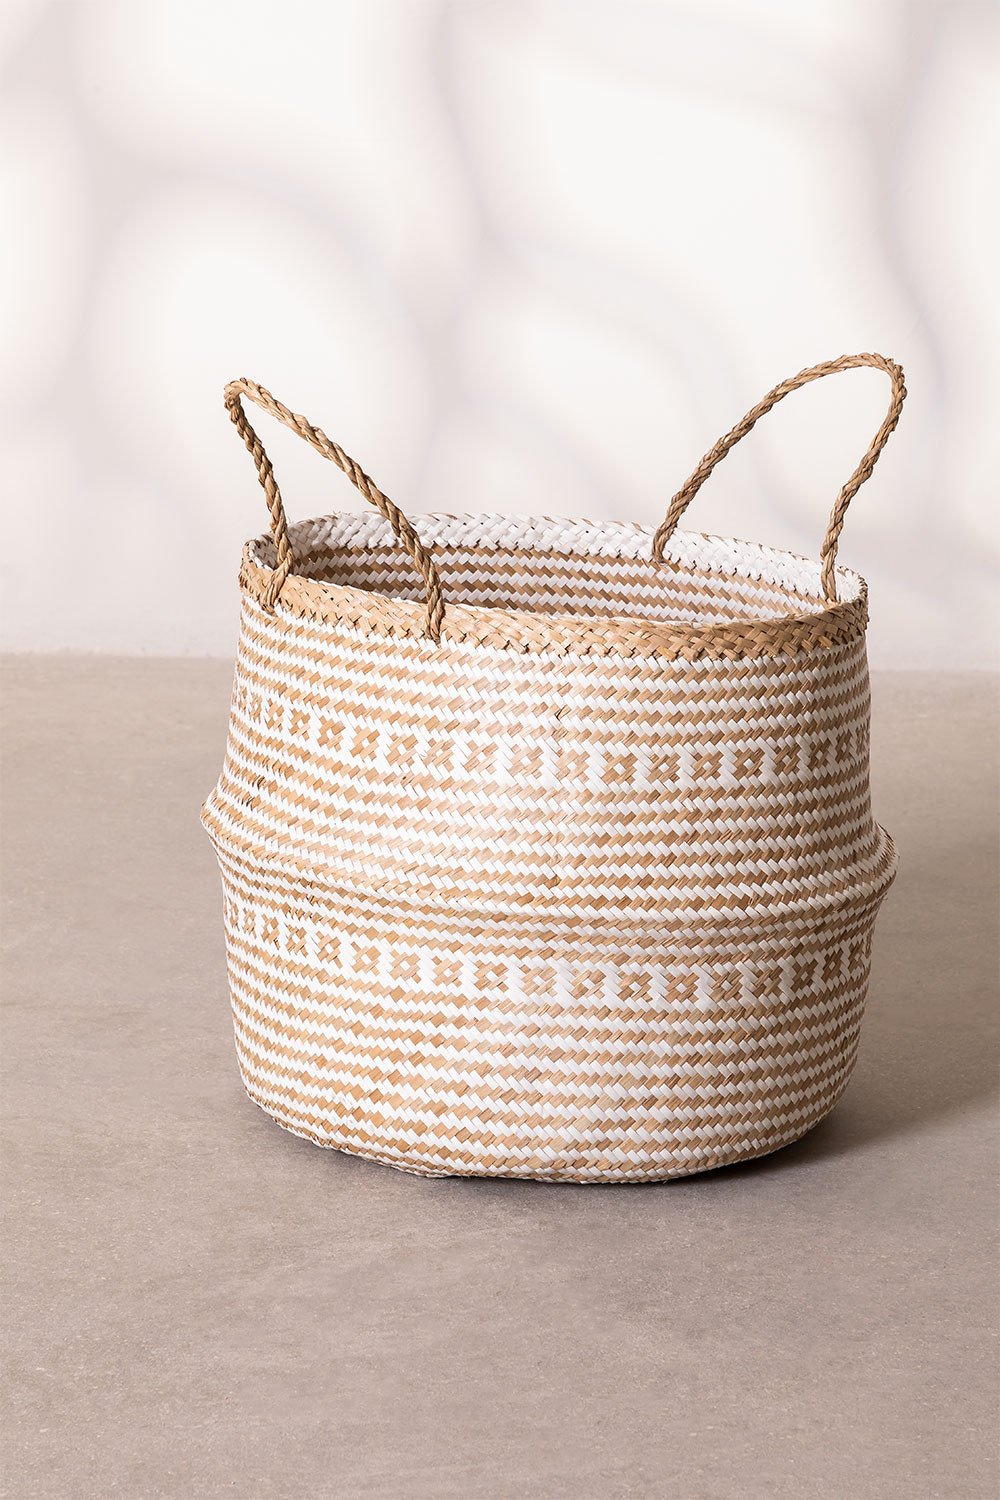 Handcrafted Basket Kahs Osaic, gallery image 1